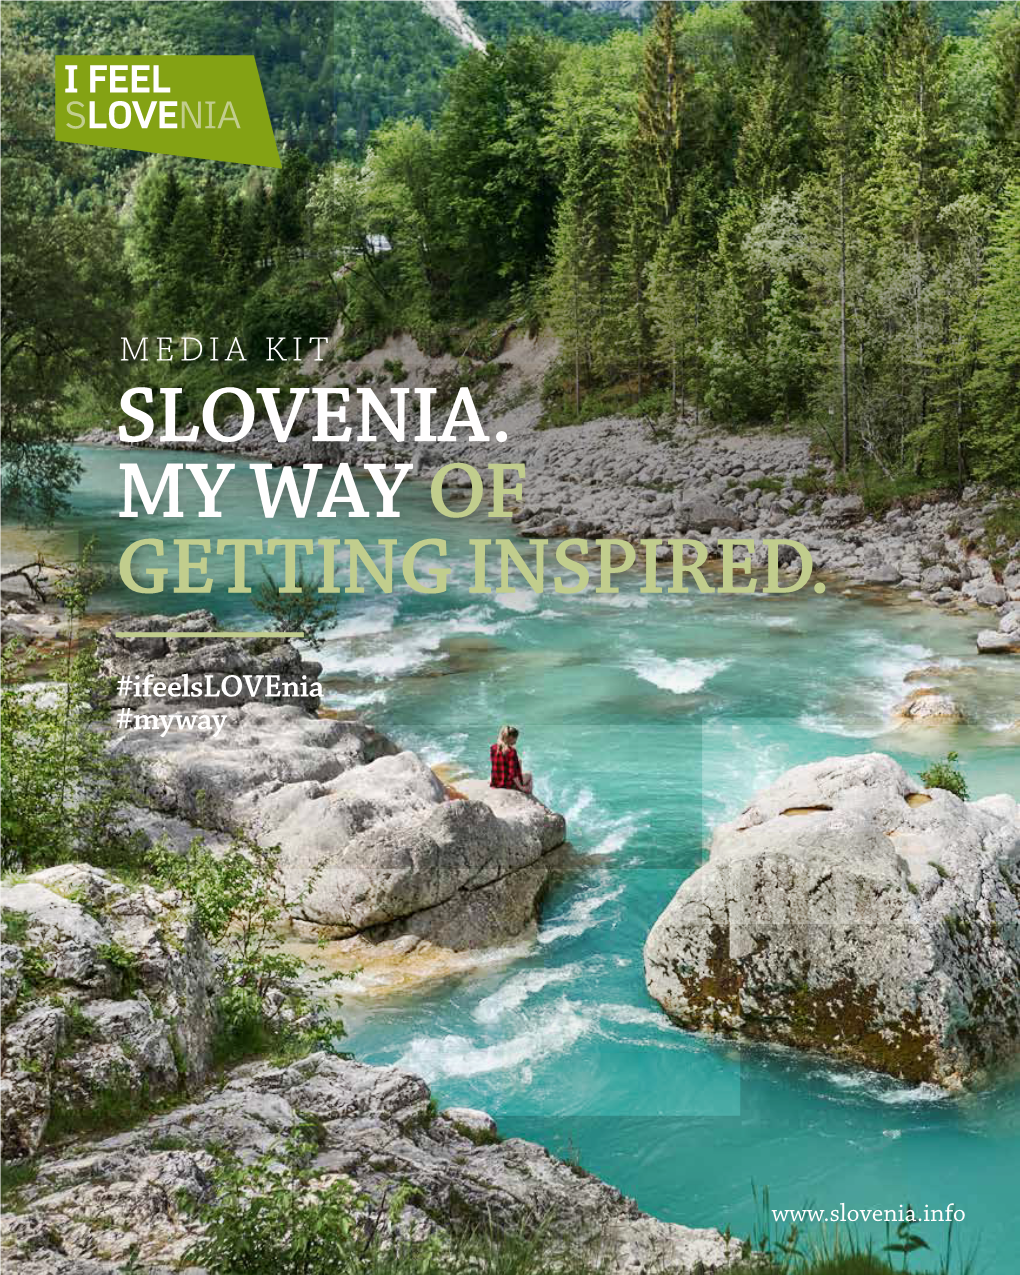 Slovenia. My Way of Getting Inspired